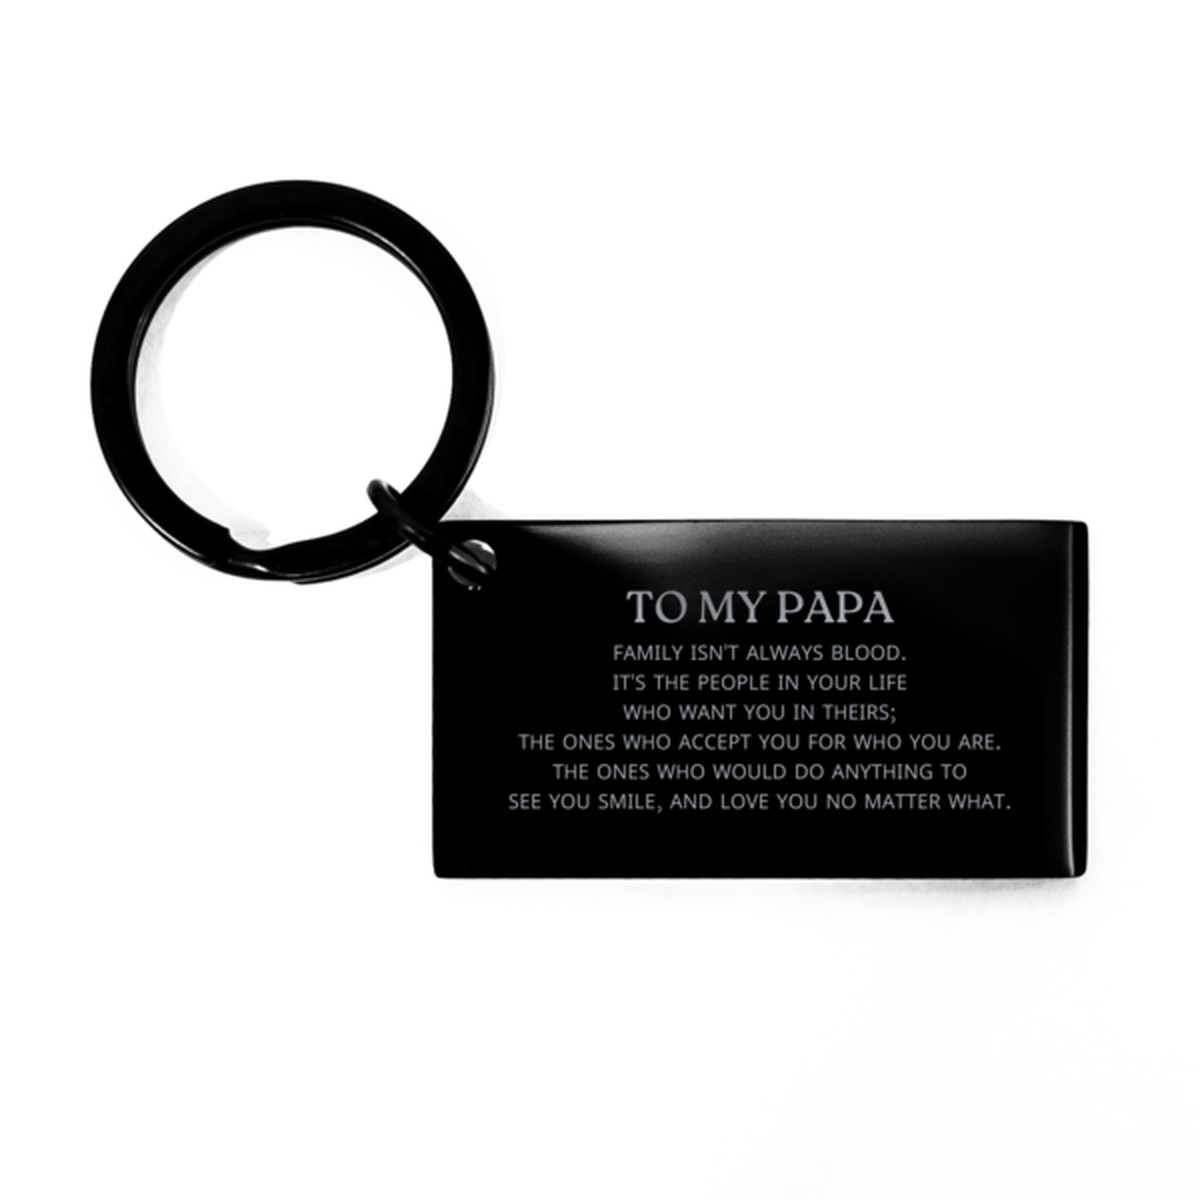 To My Papa Gifts, Family isn't always blood, Papa Keychain, Birthday Christmas Unique Present For Papa